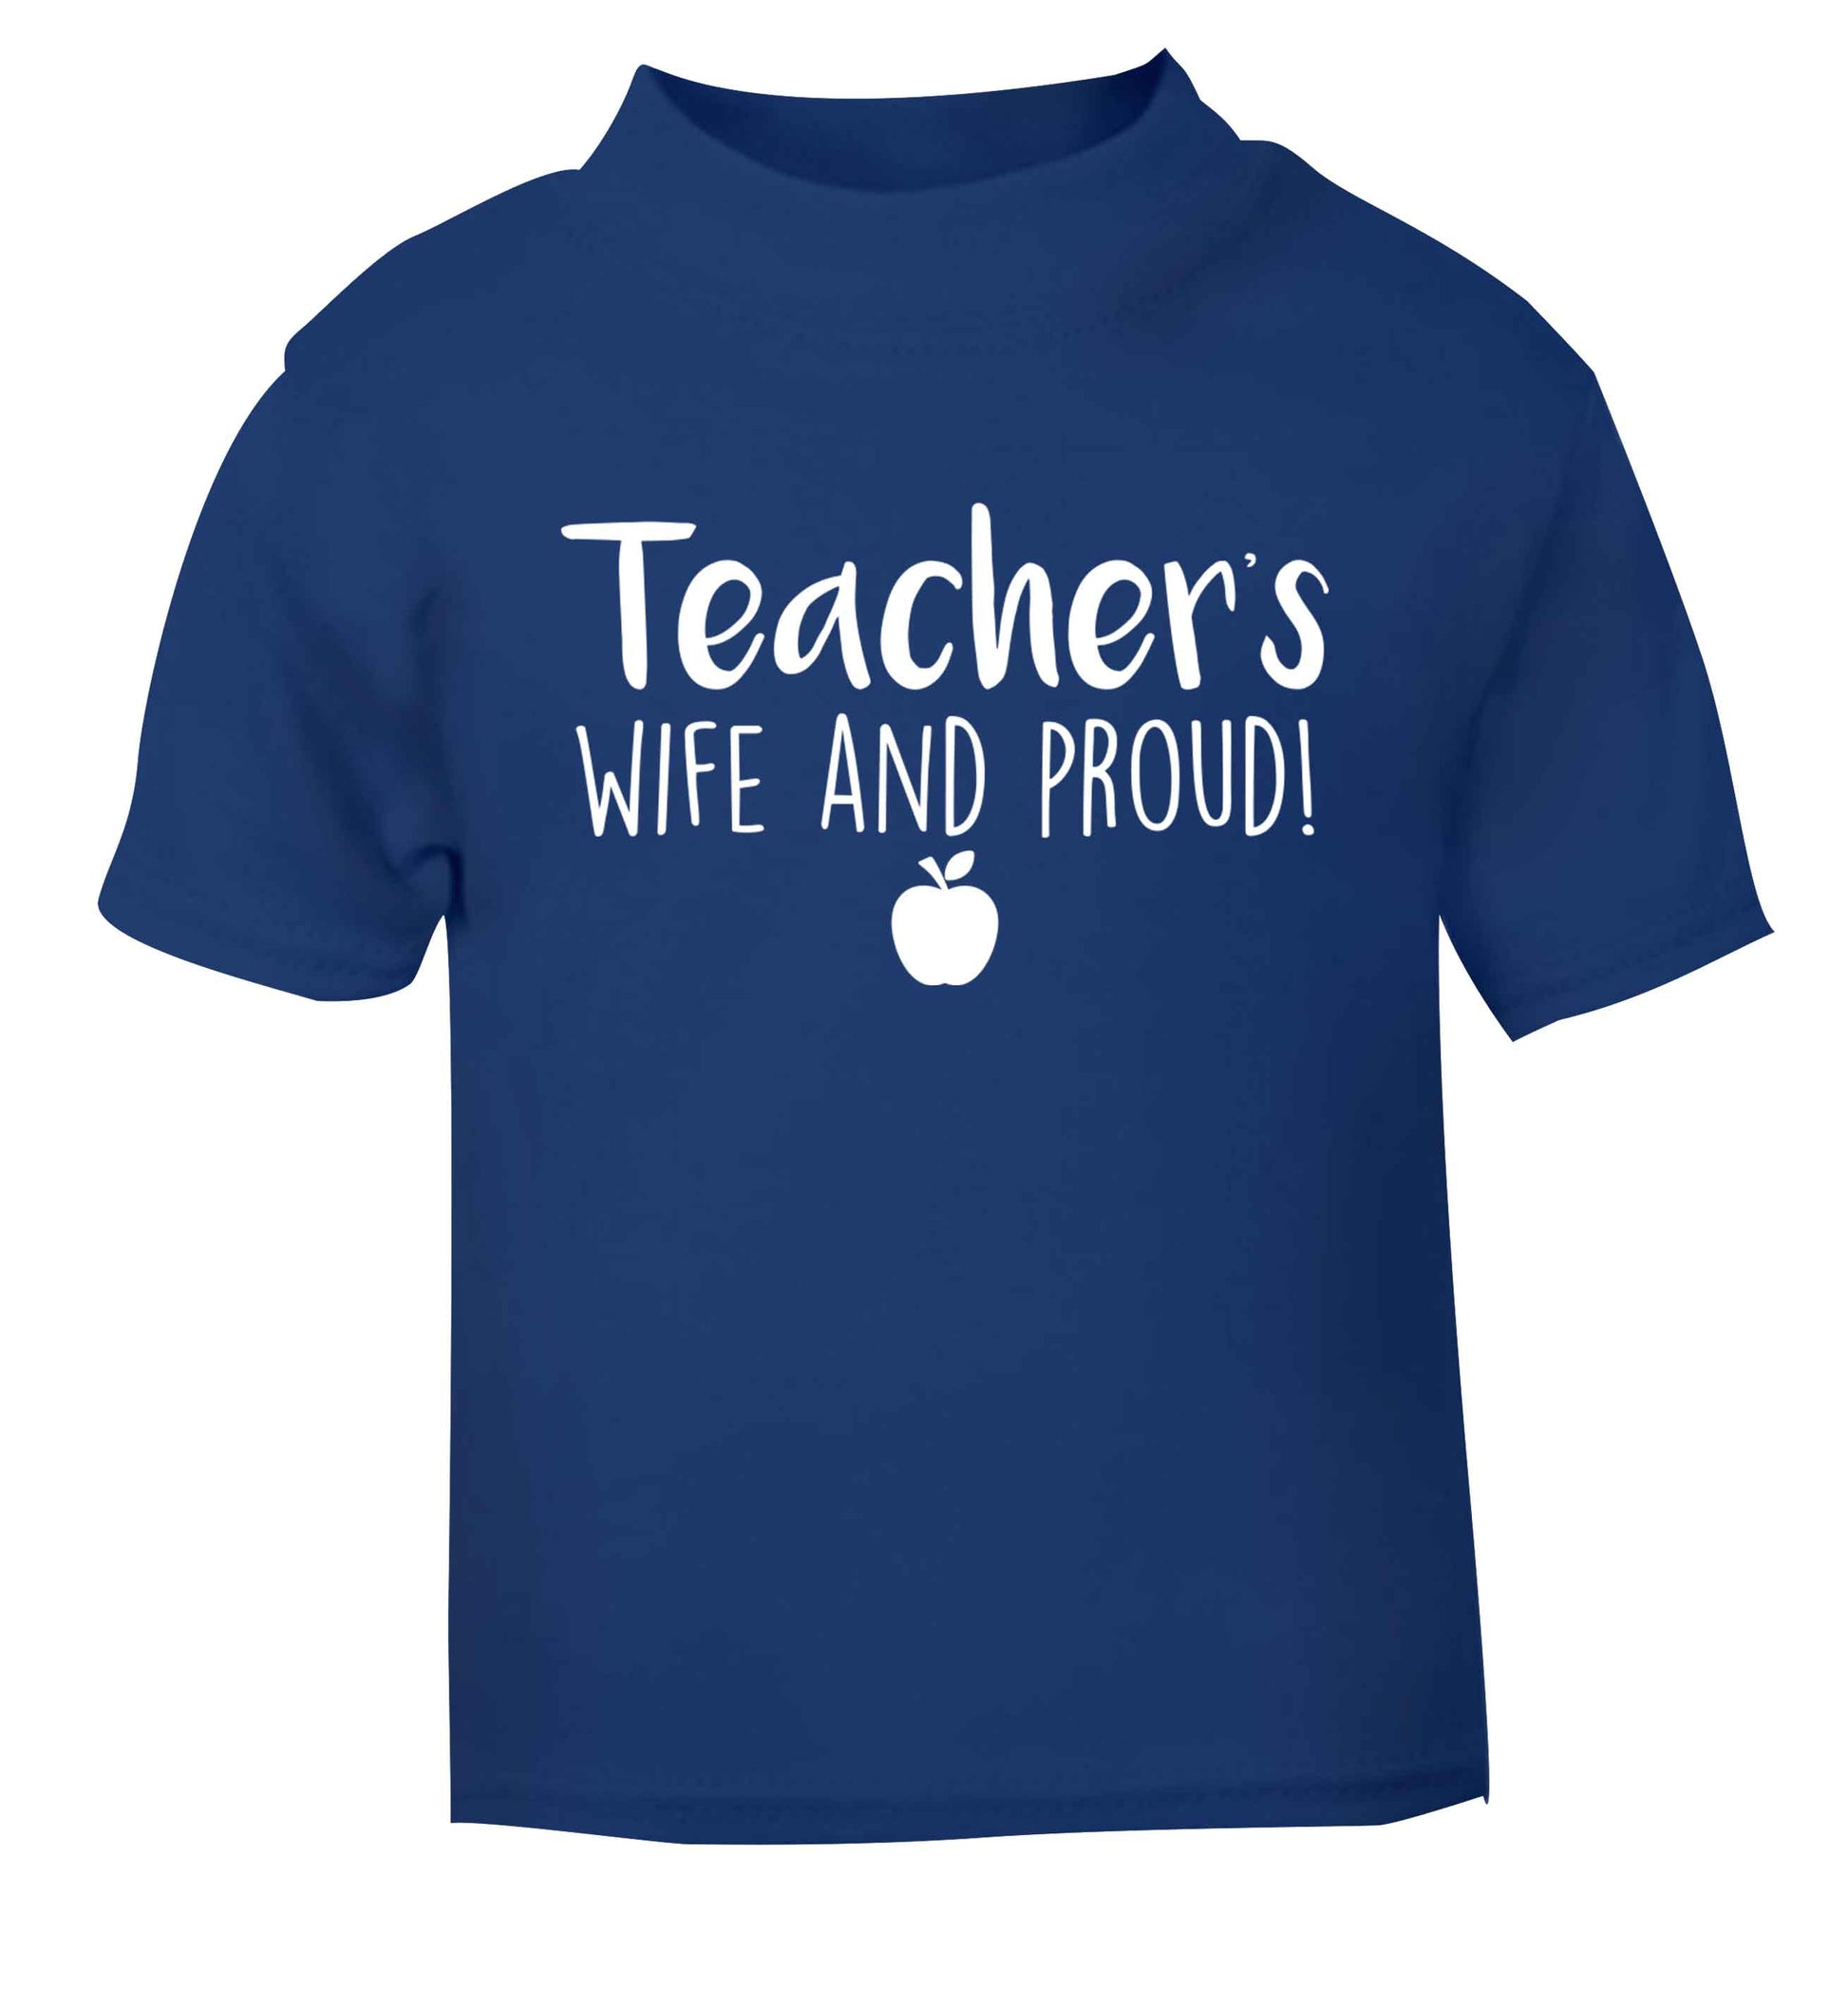 Teachers wife and proud blue baby toddler Tshirt 2 Years